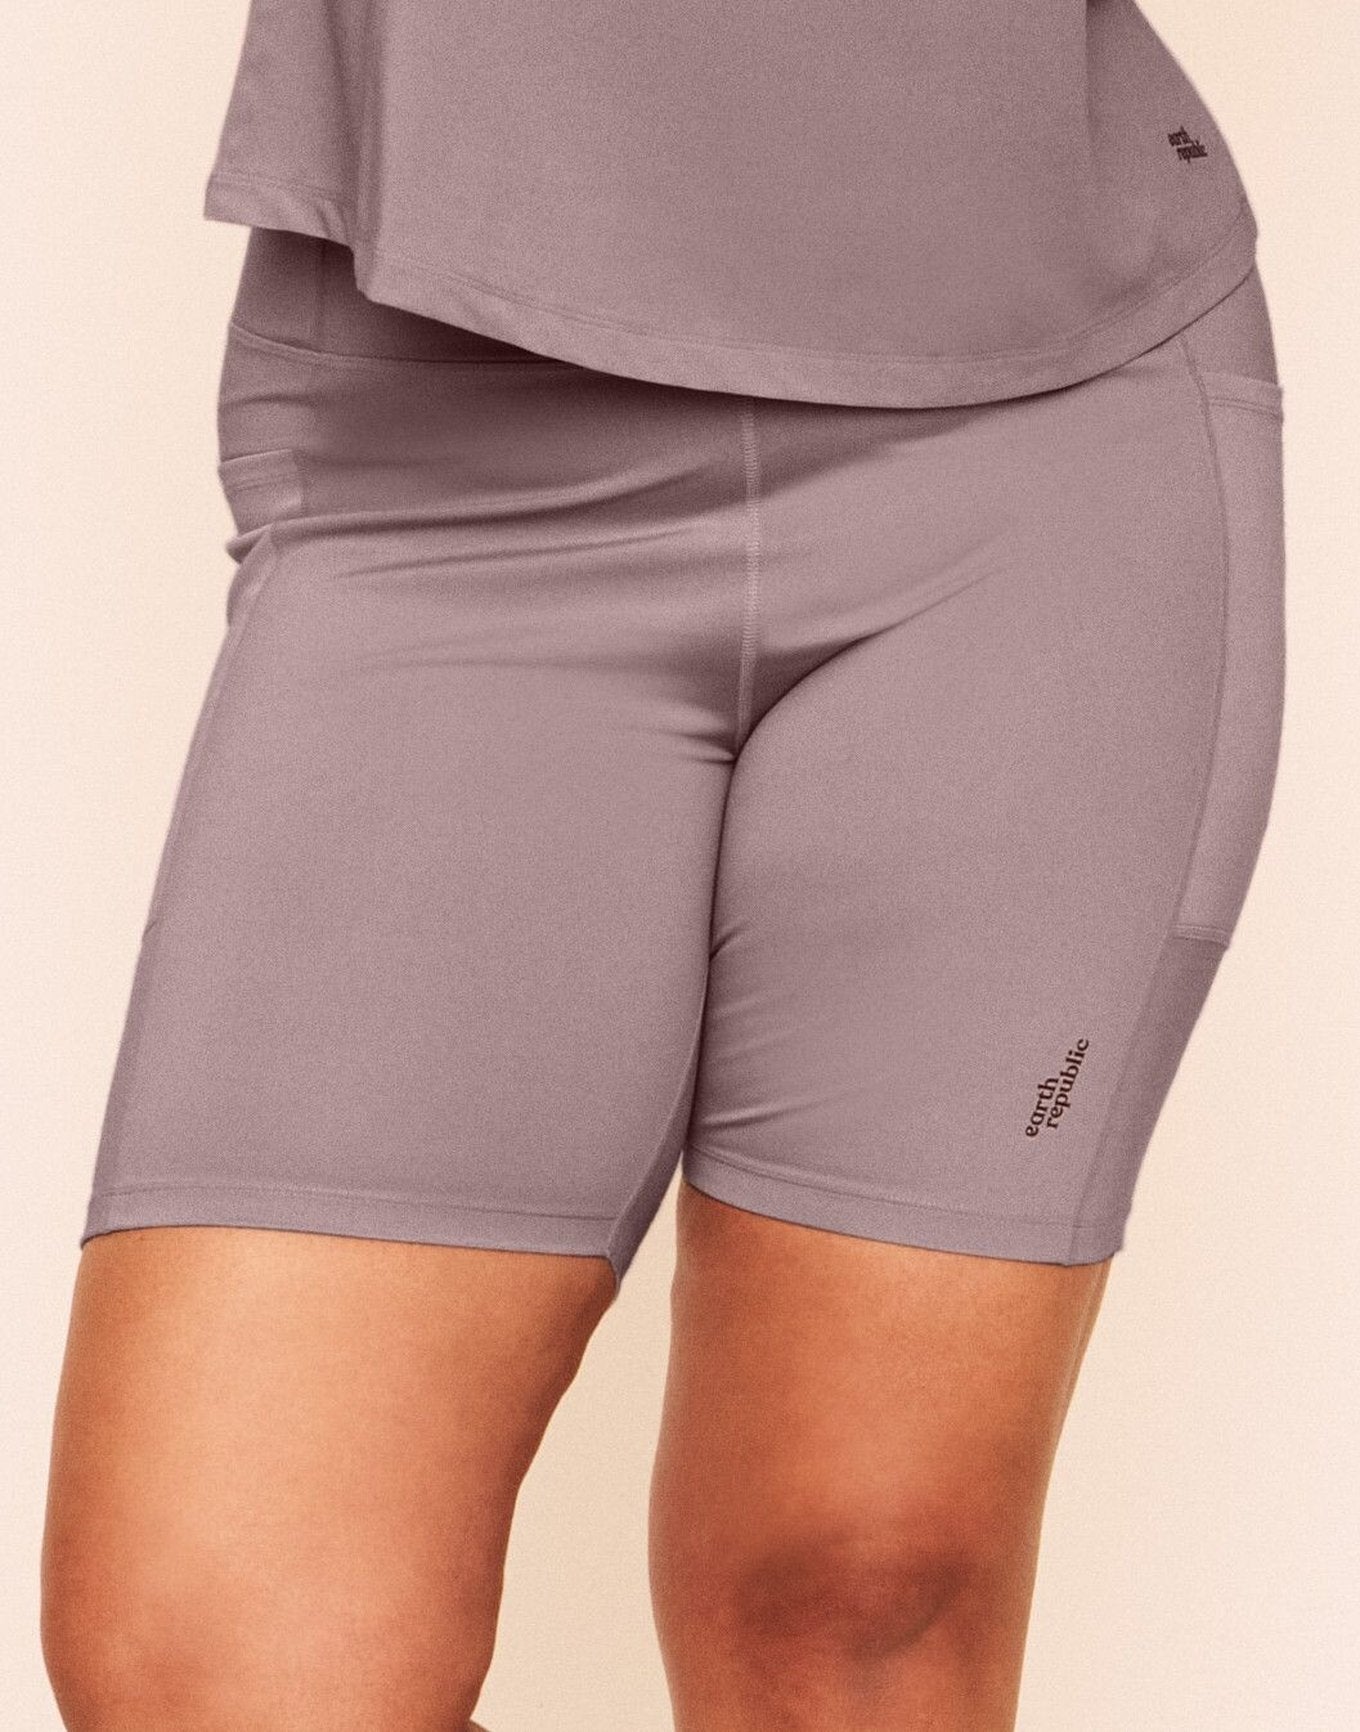 Earth Republic Anais High Waisted Short Biker Shorts in color Deauville Mauve and shape short